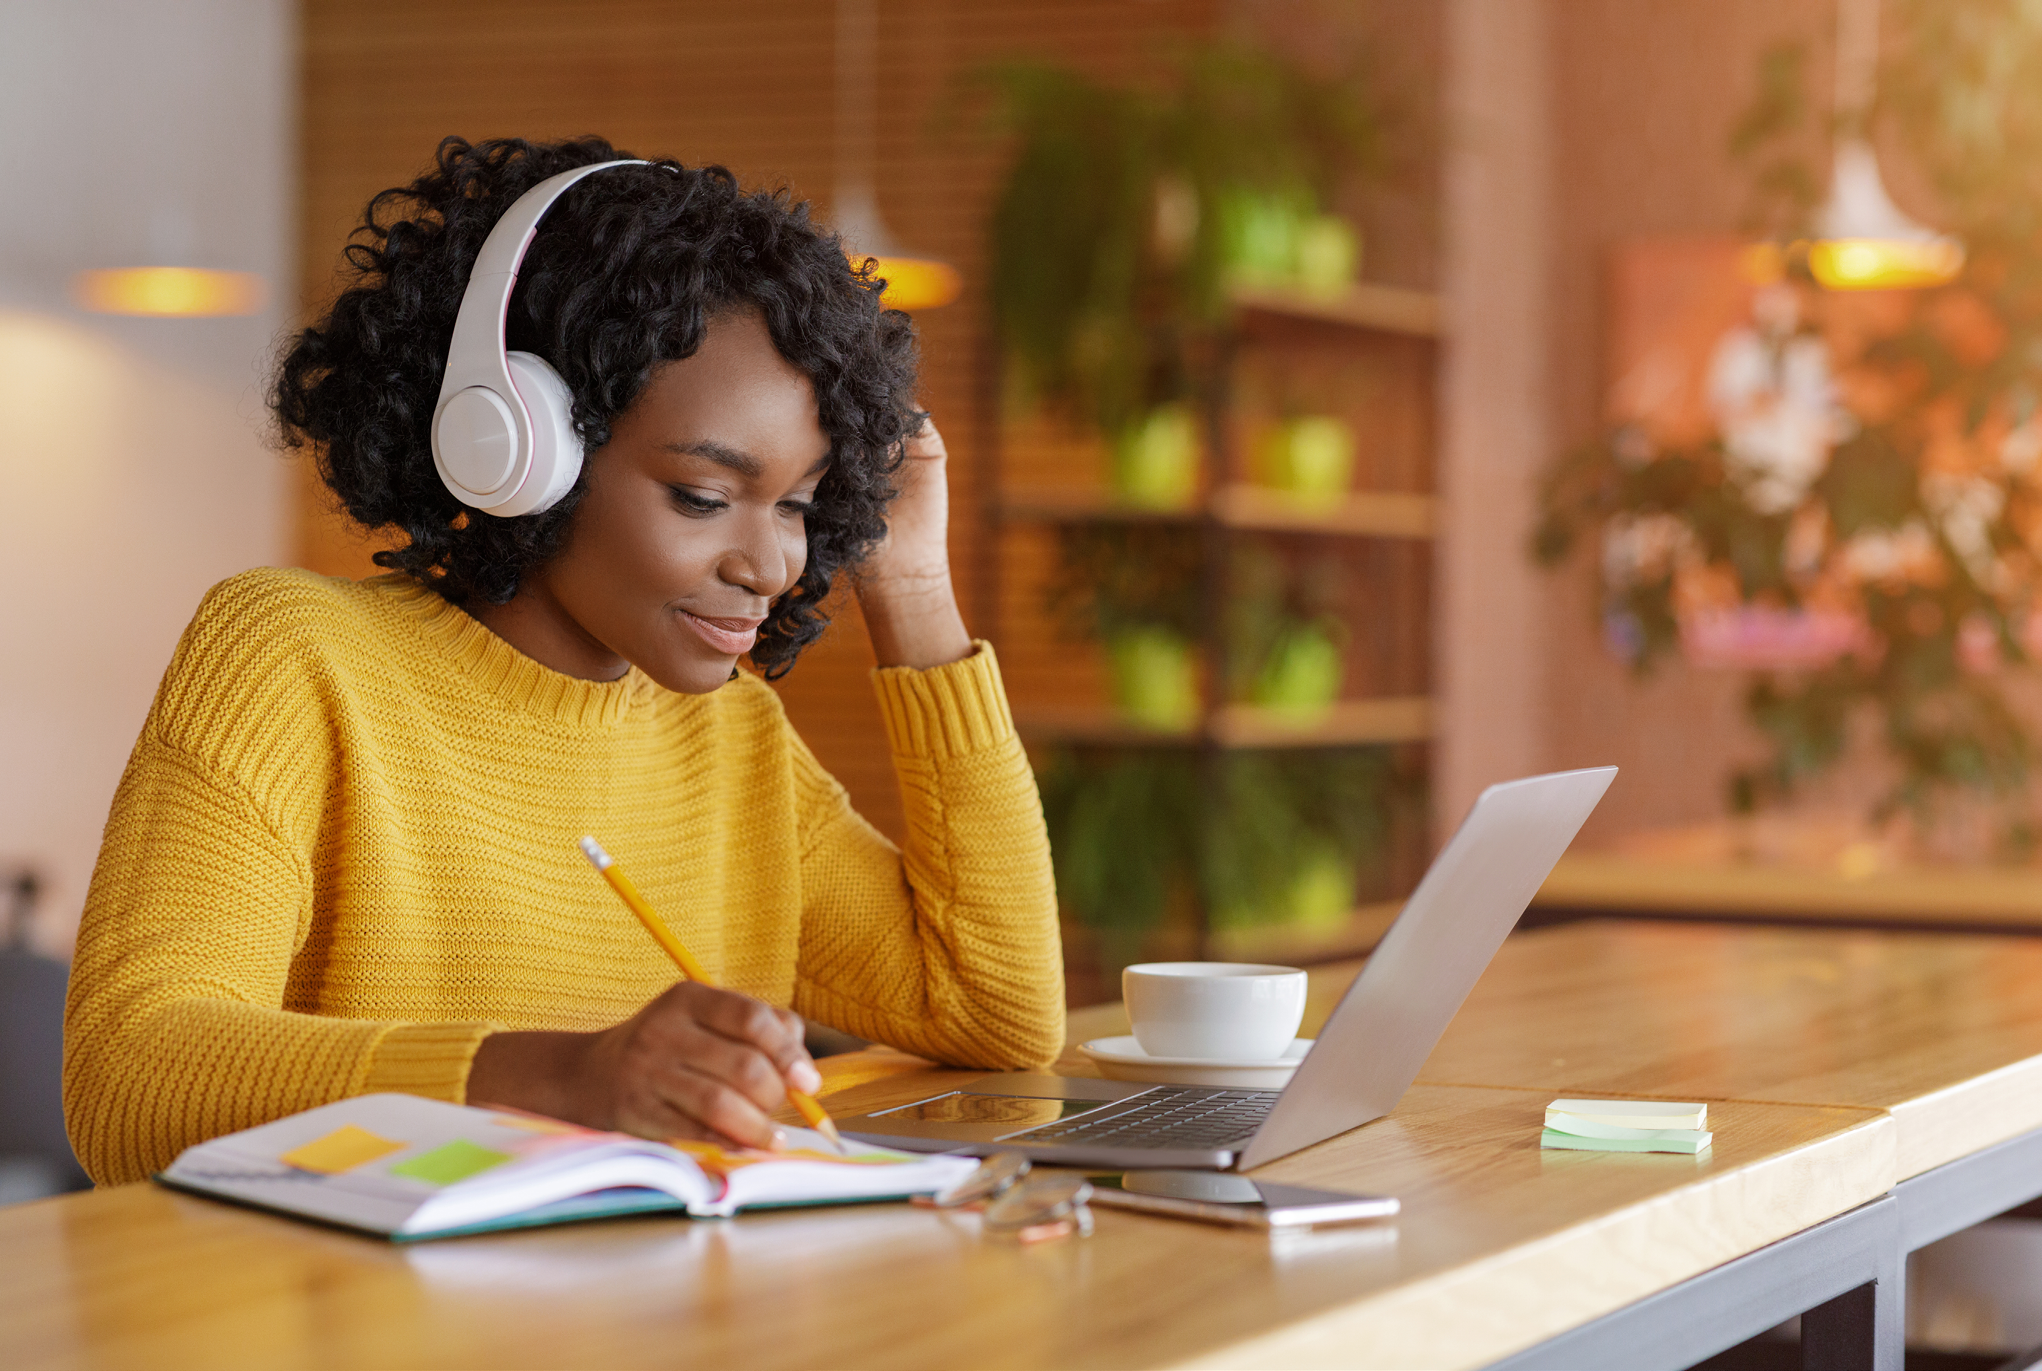 Woman wearing headphones sitting with her laptop and notebook open